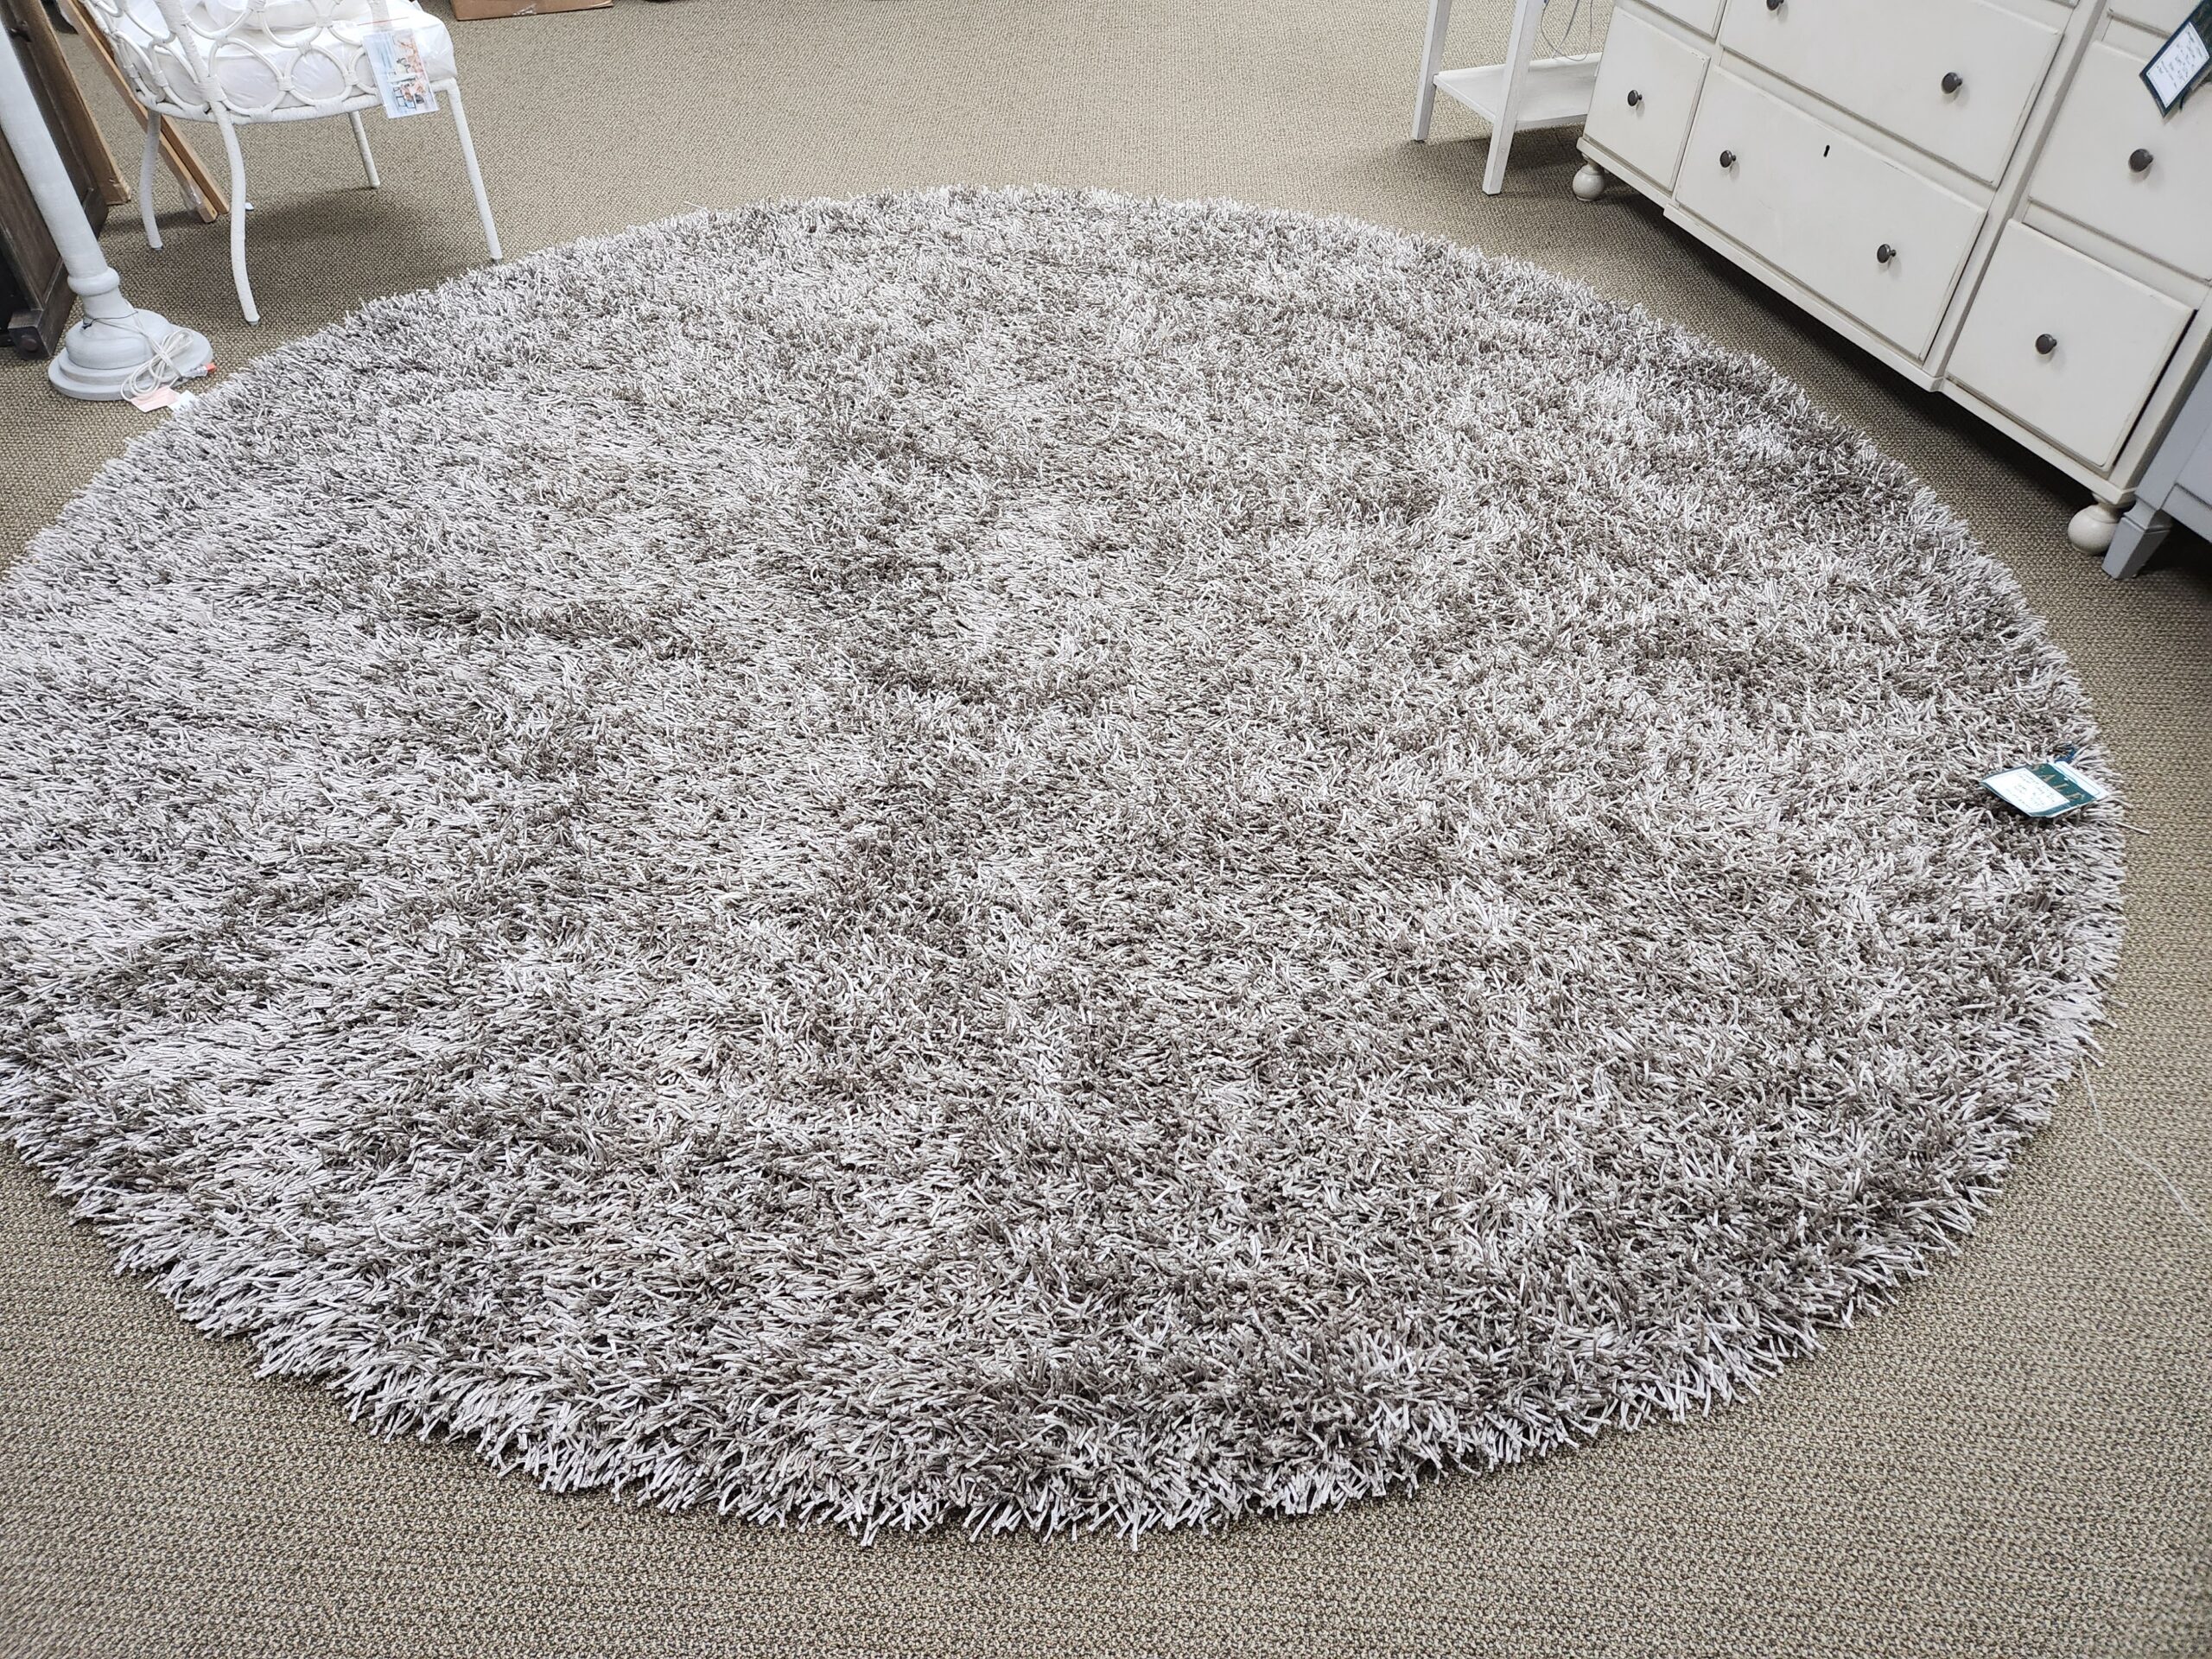 a large round rug on the floor in a room